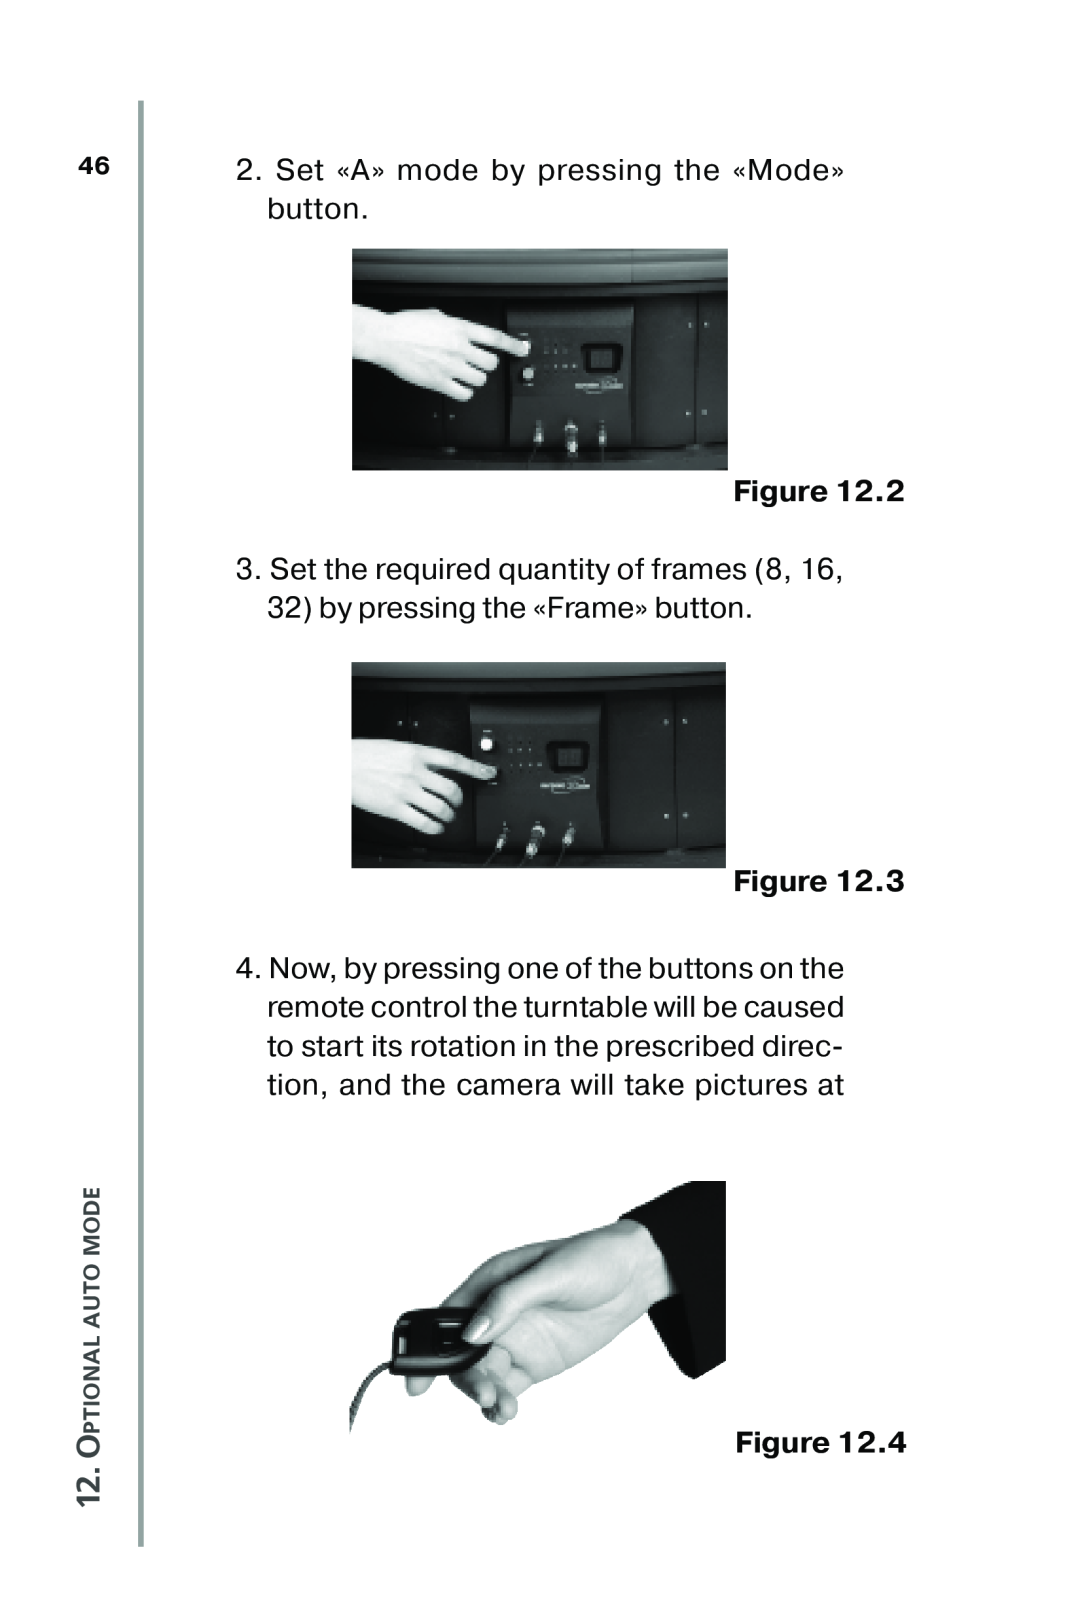 Nikon XT350, XT100 Set «A» mode by pressing the «Mode» button, Set the required quantity of frames, Optional Auto Mode 